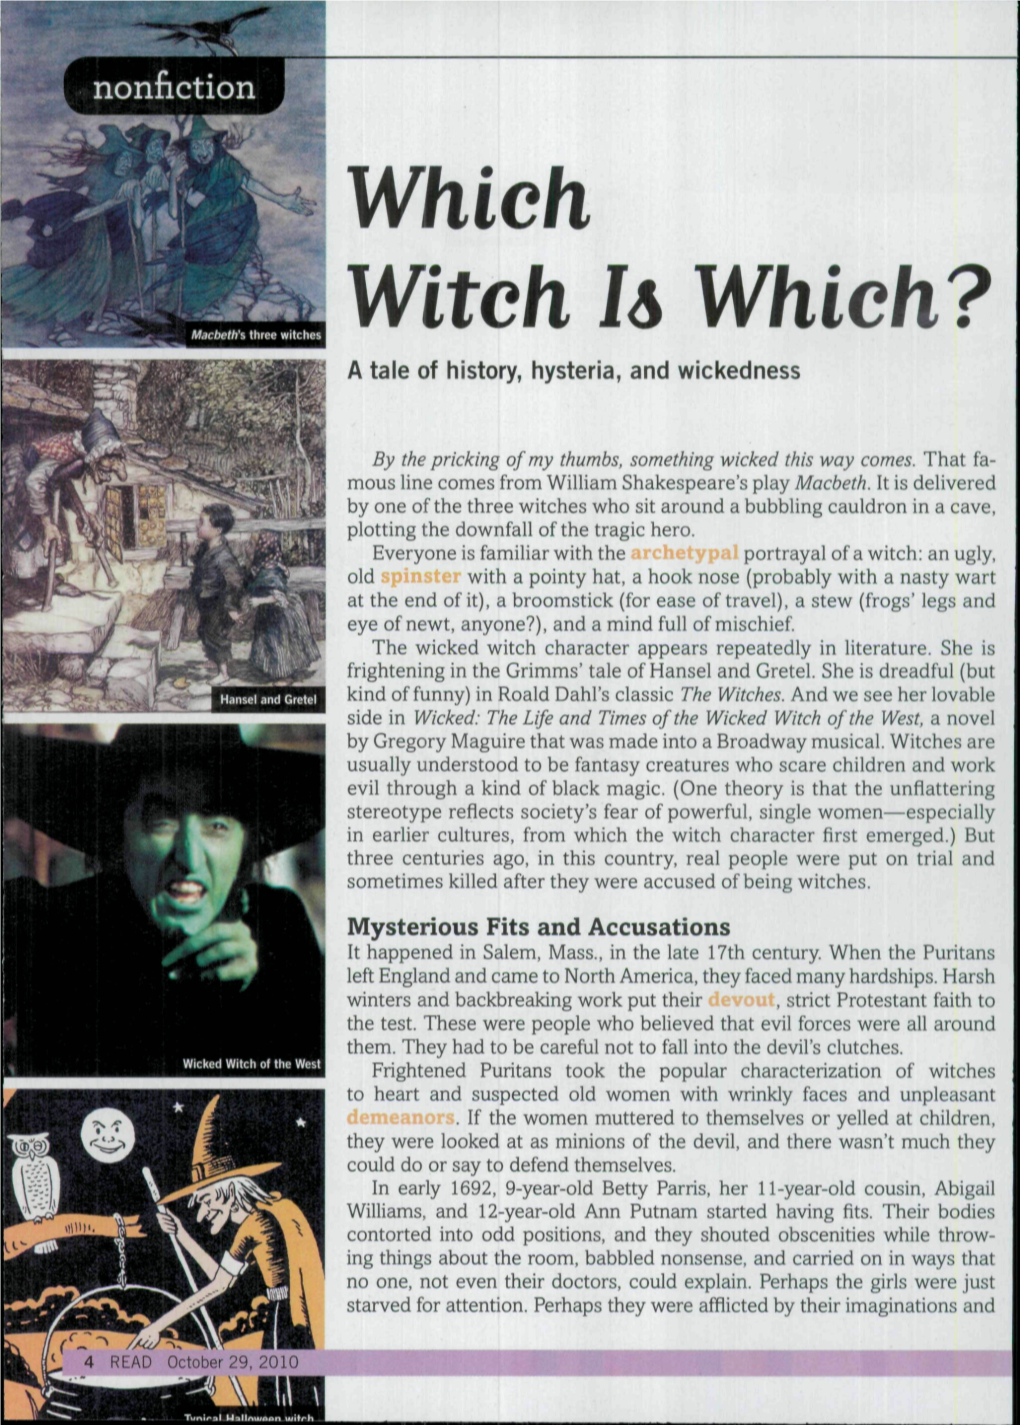 Witch Ii Whieh? a Tale of History, Hysteria, and Wickedness